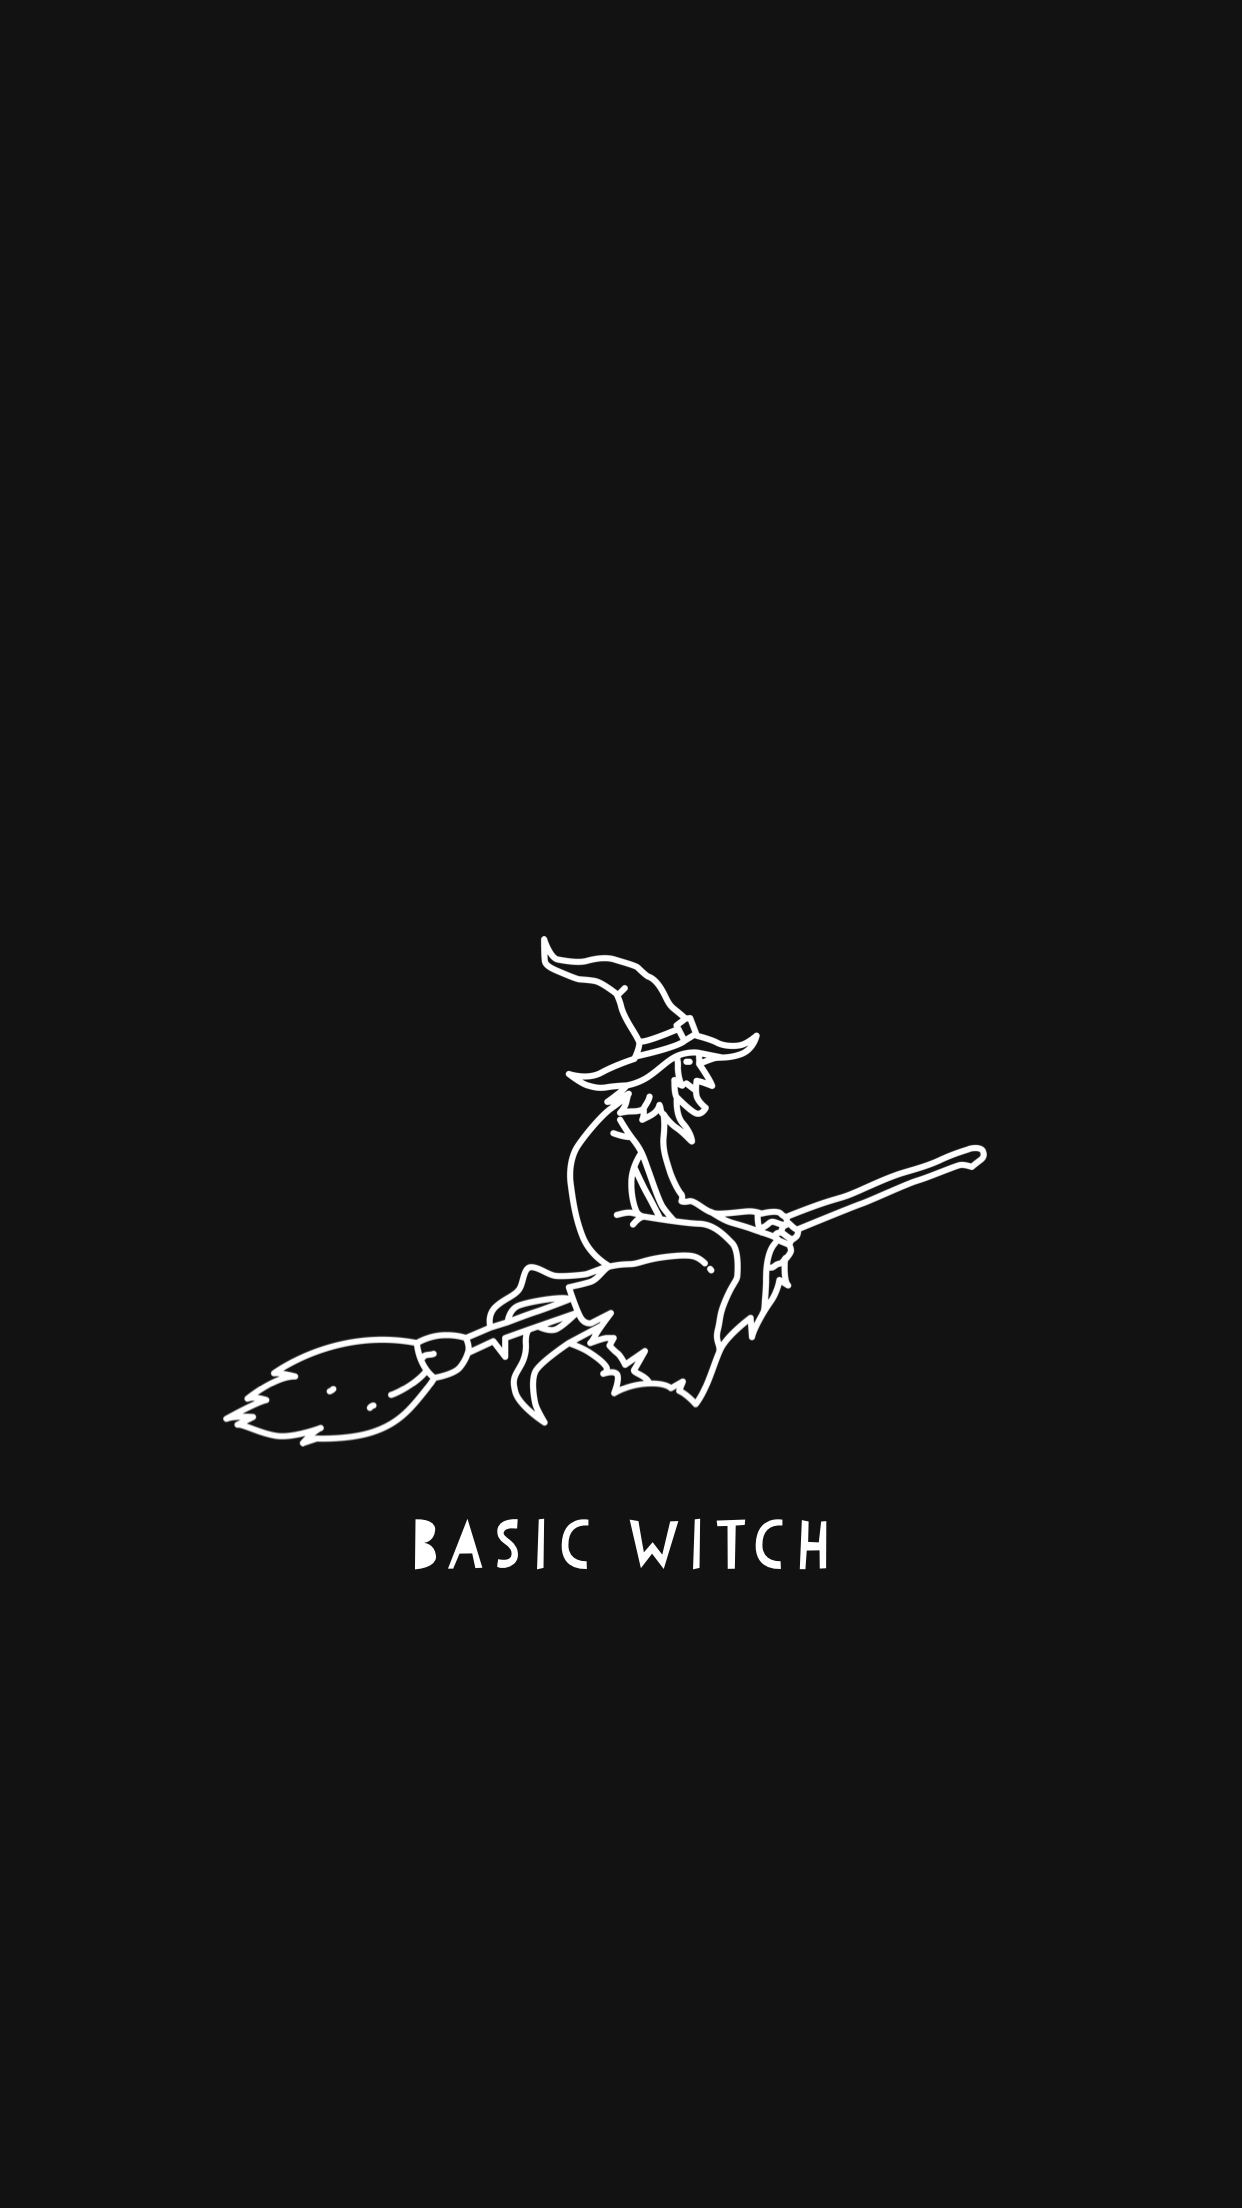 IMG_0220.PNG 1 242×2 208 пикс. Witchy wallpaper, Witch wallpaper, Halloween wallpaper iphone